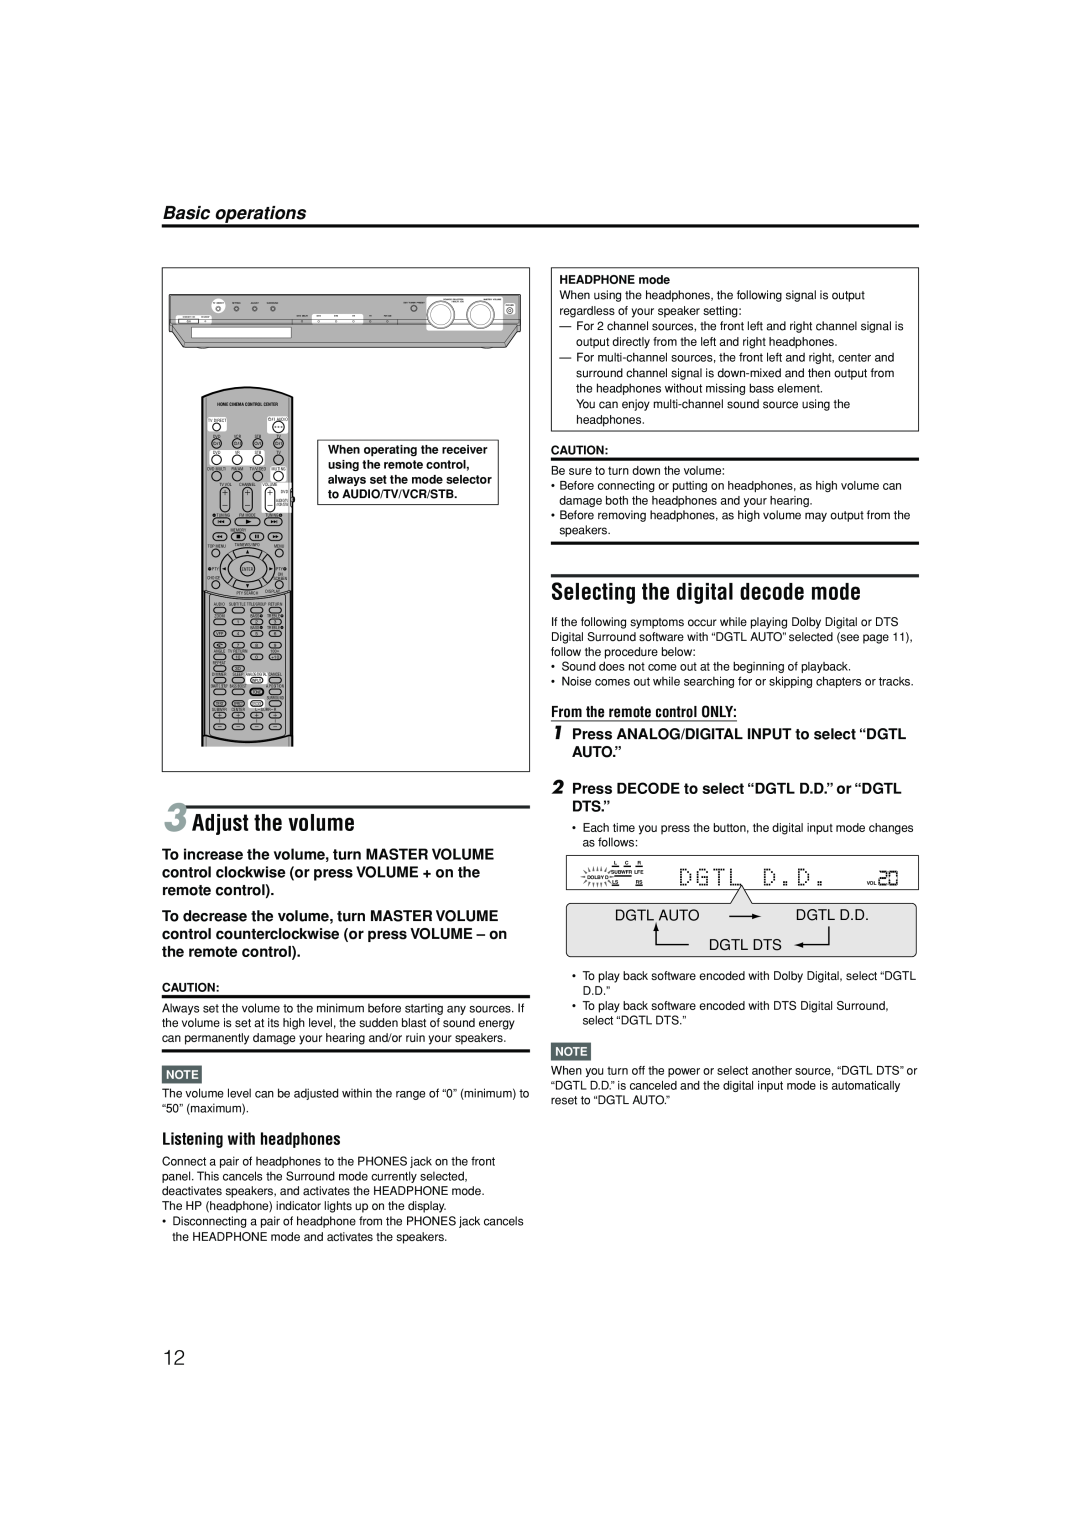 JVC LVT1112-001A manual Adjust the volume, Selecting the digital decode mode, Basic operations, Listening with headphones 